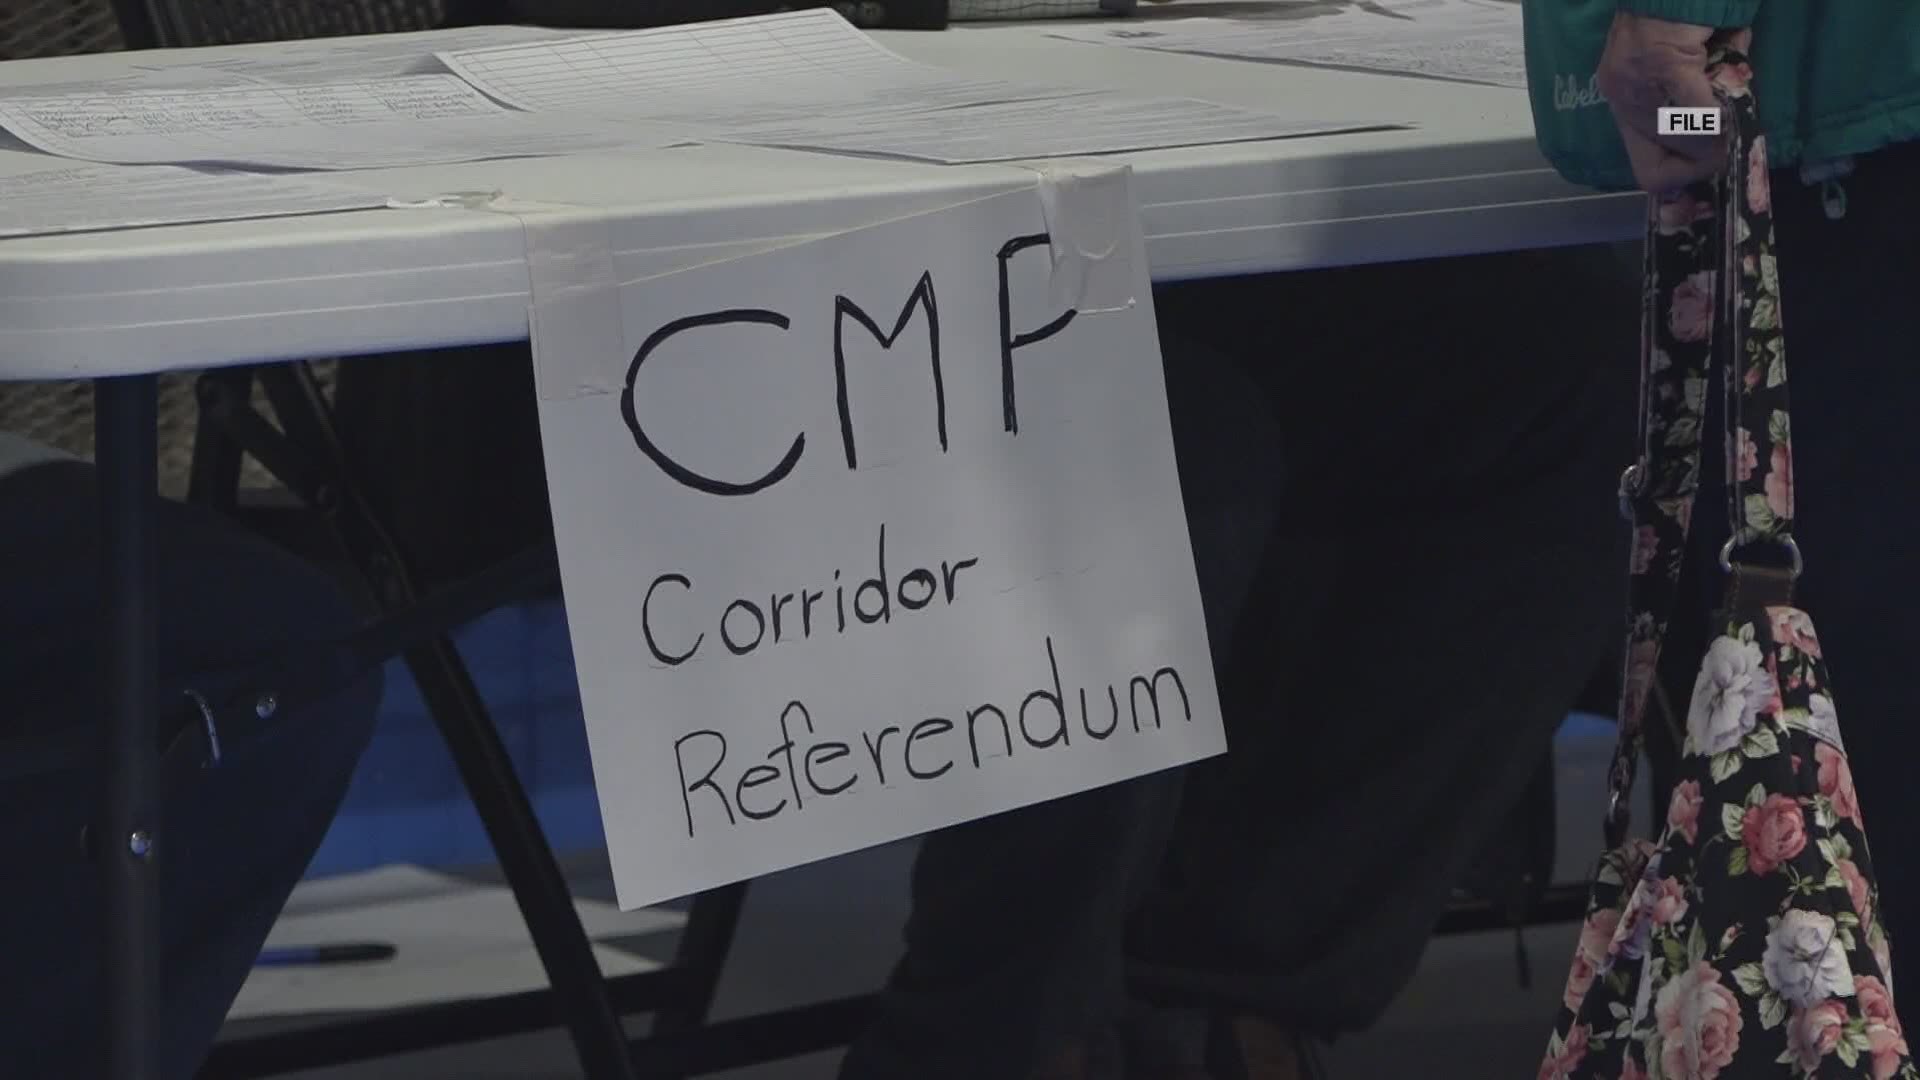 A Superior Court judge ruled Mainers will be allowed to vote on CMP transmission corridor project